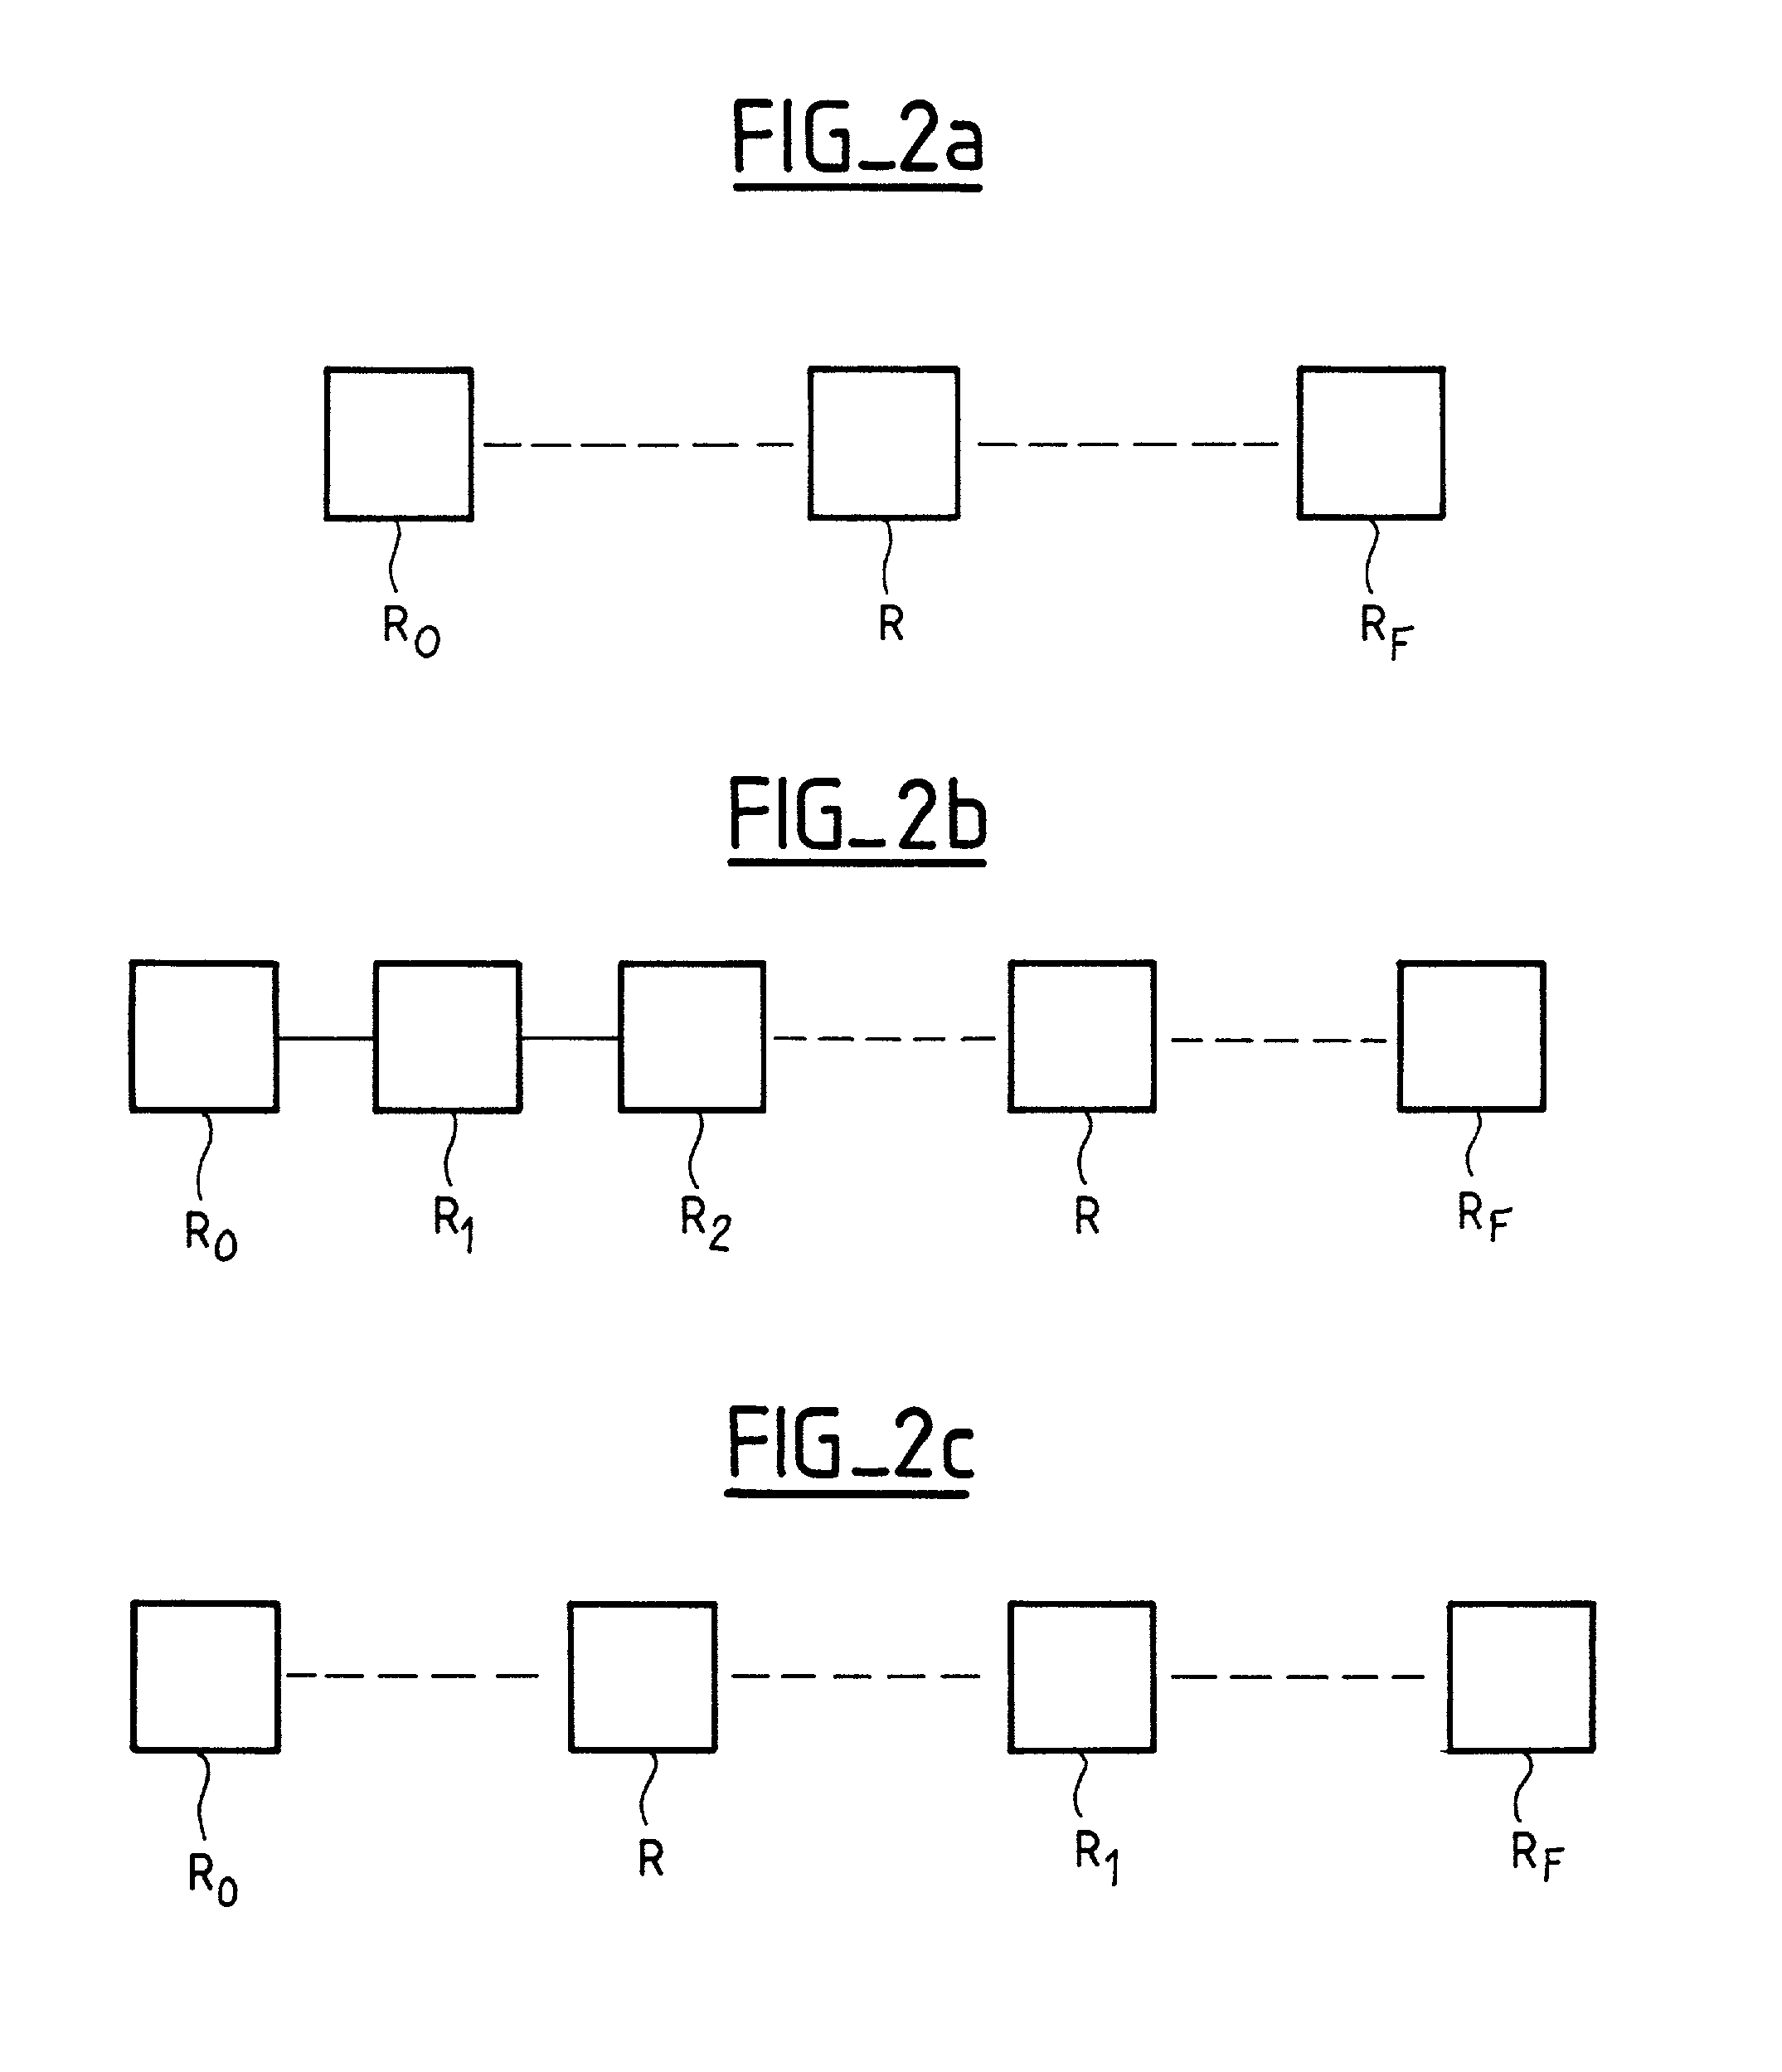 Dichotomy-based method of tracing a route between two nodes of a data network